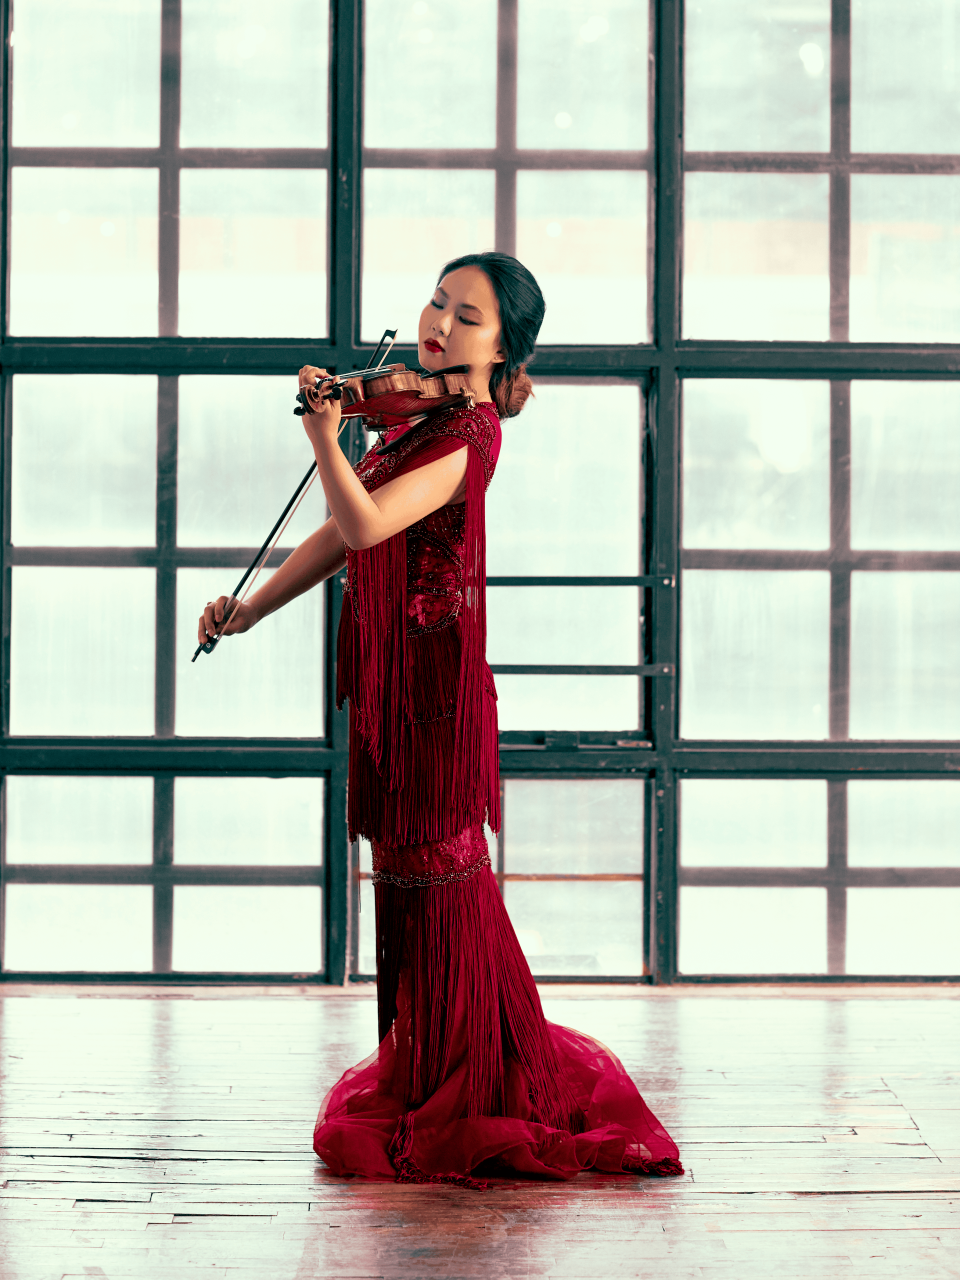 Violinist Stella Chen, who spent a summer at the Sarasota Music Festival, returns as guest soloist with the Sarasota Orchestra to perform the Prokofiev Violin Concerto No. 2.